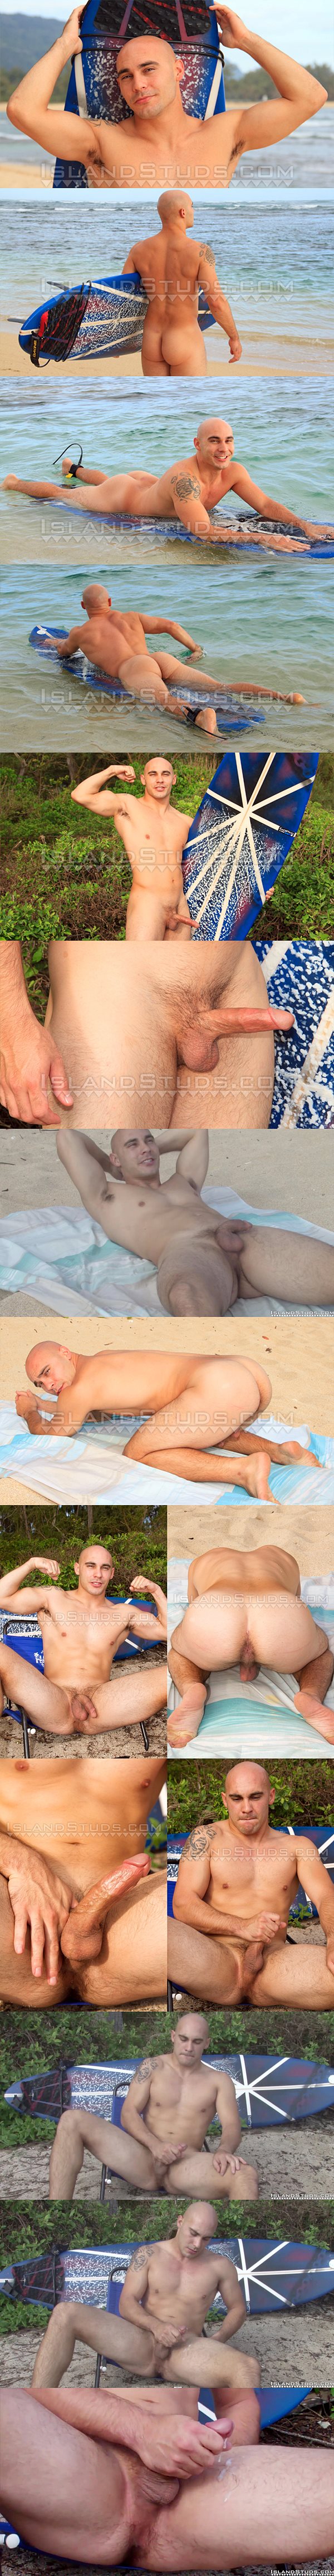 American military stud, bald straight hunk Justin flexes, surf naked, exposes his virgin manhole and jerks off at Island Studs